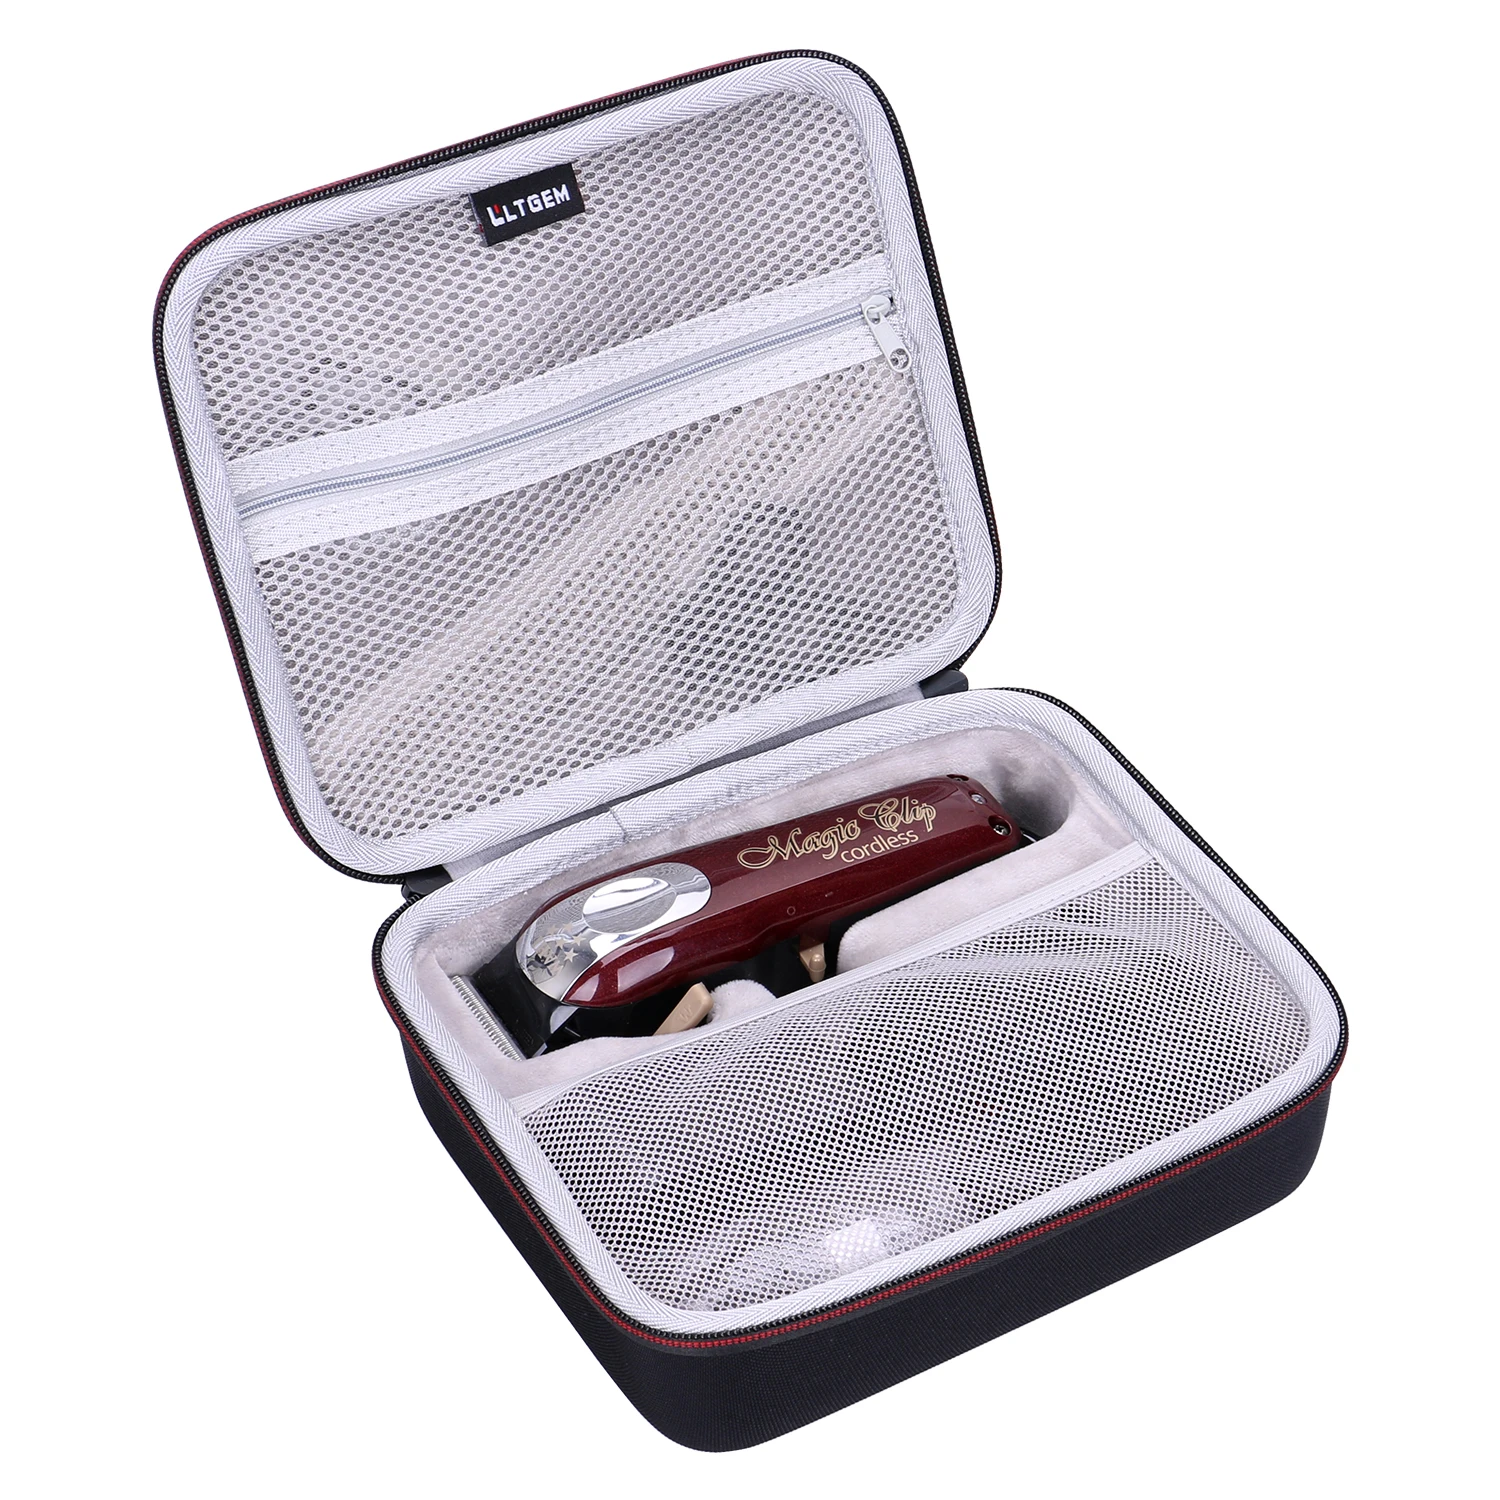 

LTGEM Carrying Hard Case for Wahl Professional 5-Star Cord/Cordless Magic Clip #8148 – Great for Barbers and Stylists – Precisi